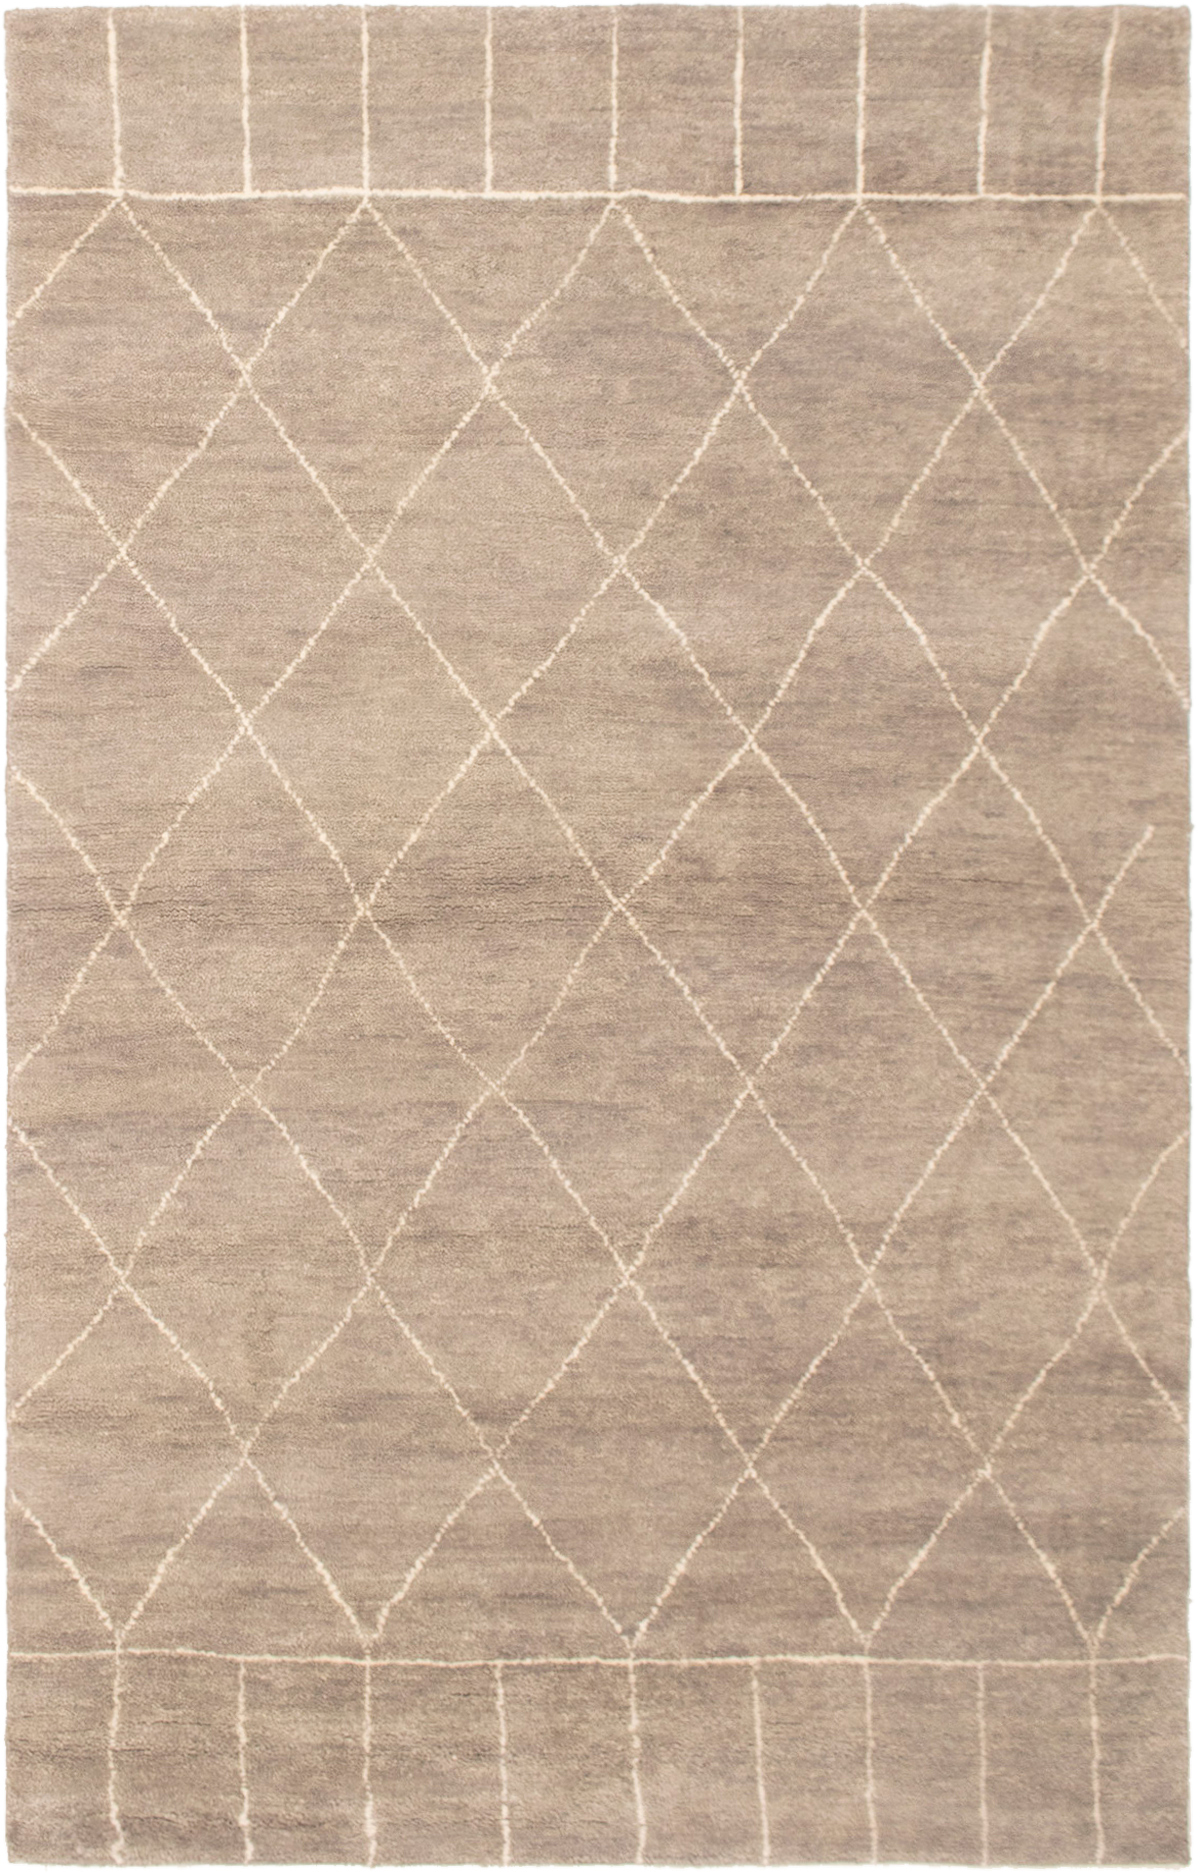 Hand-knotted Tangier Grey Wool Rug 5'1" x 8'5" Size: 5'1" x 8'5"  